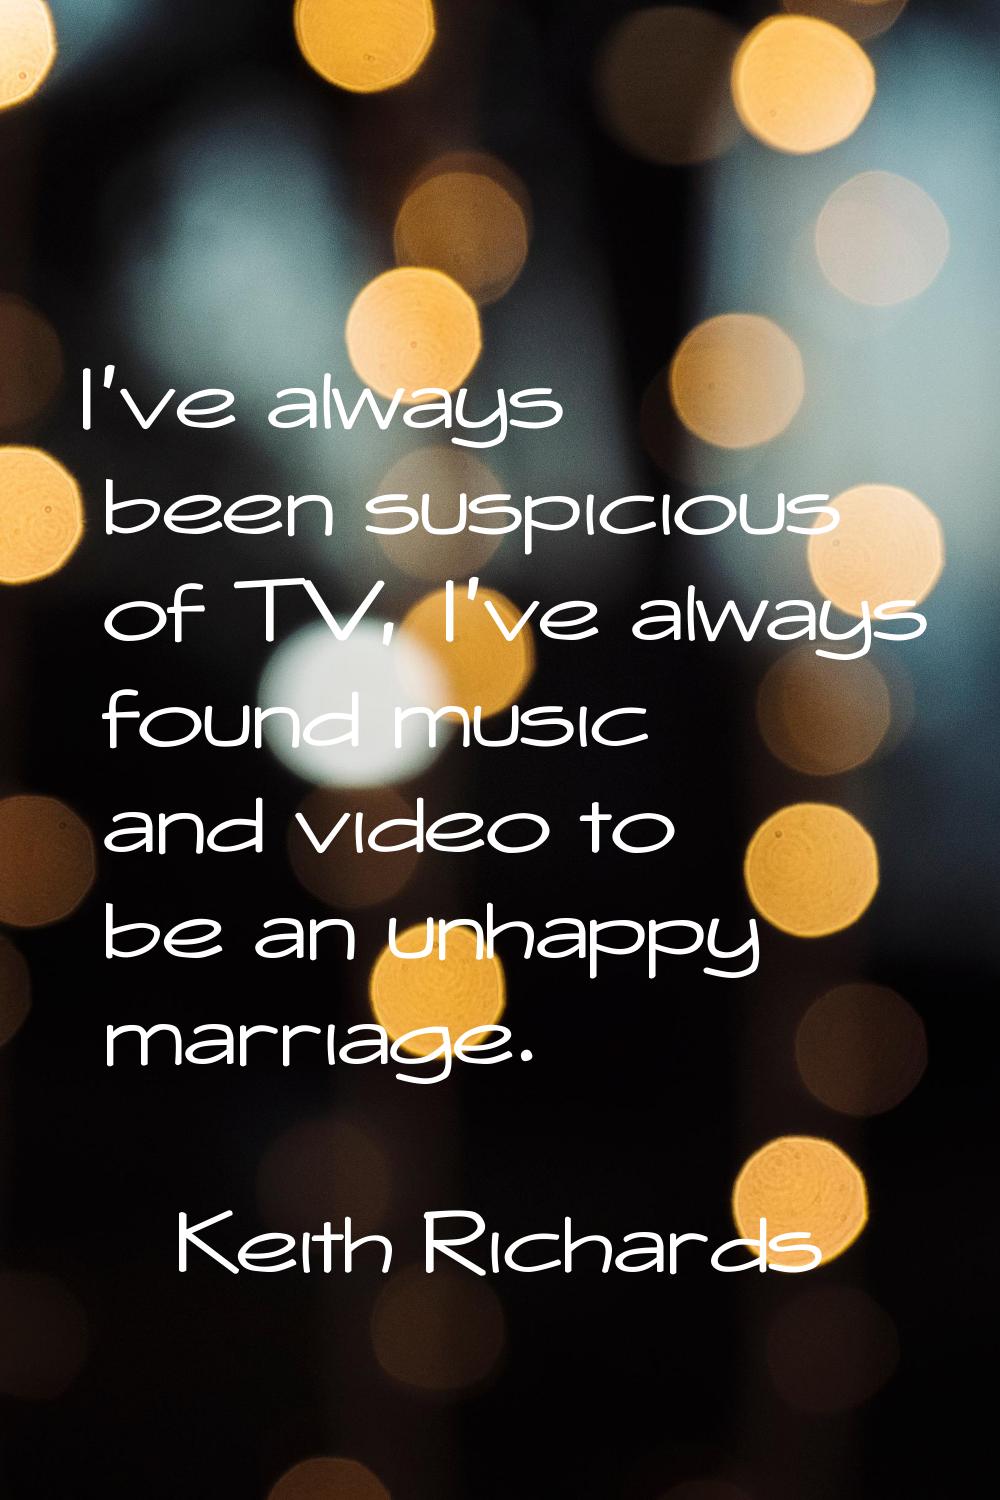 I've always been suspicious of TV, I've always found music and video to be an unhappy marriage.